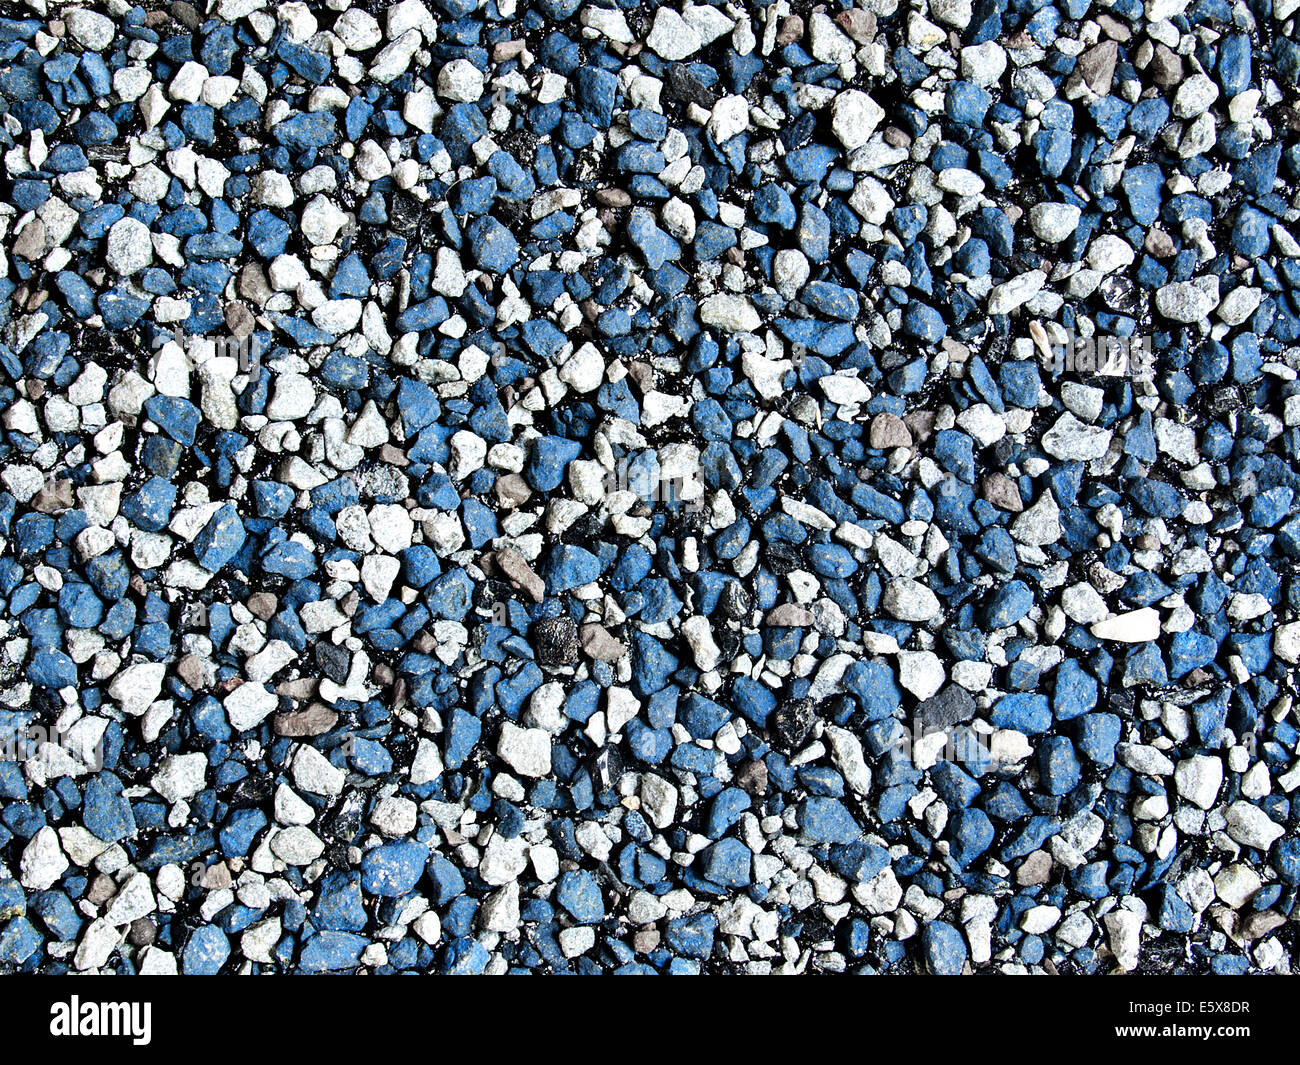 blue, white and black roofing tile stones close up Stock Photo